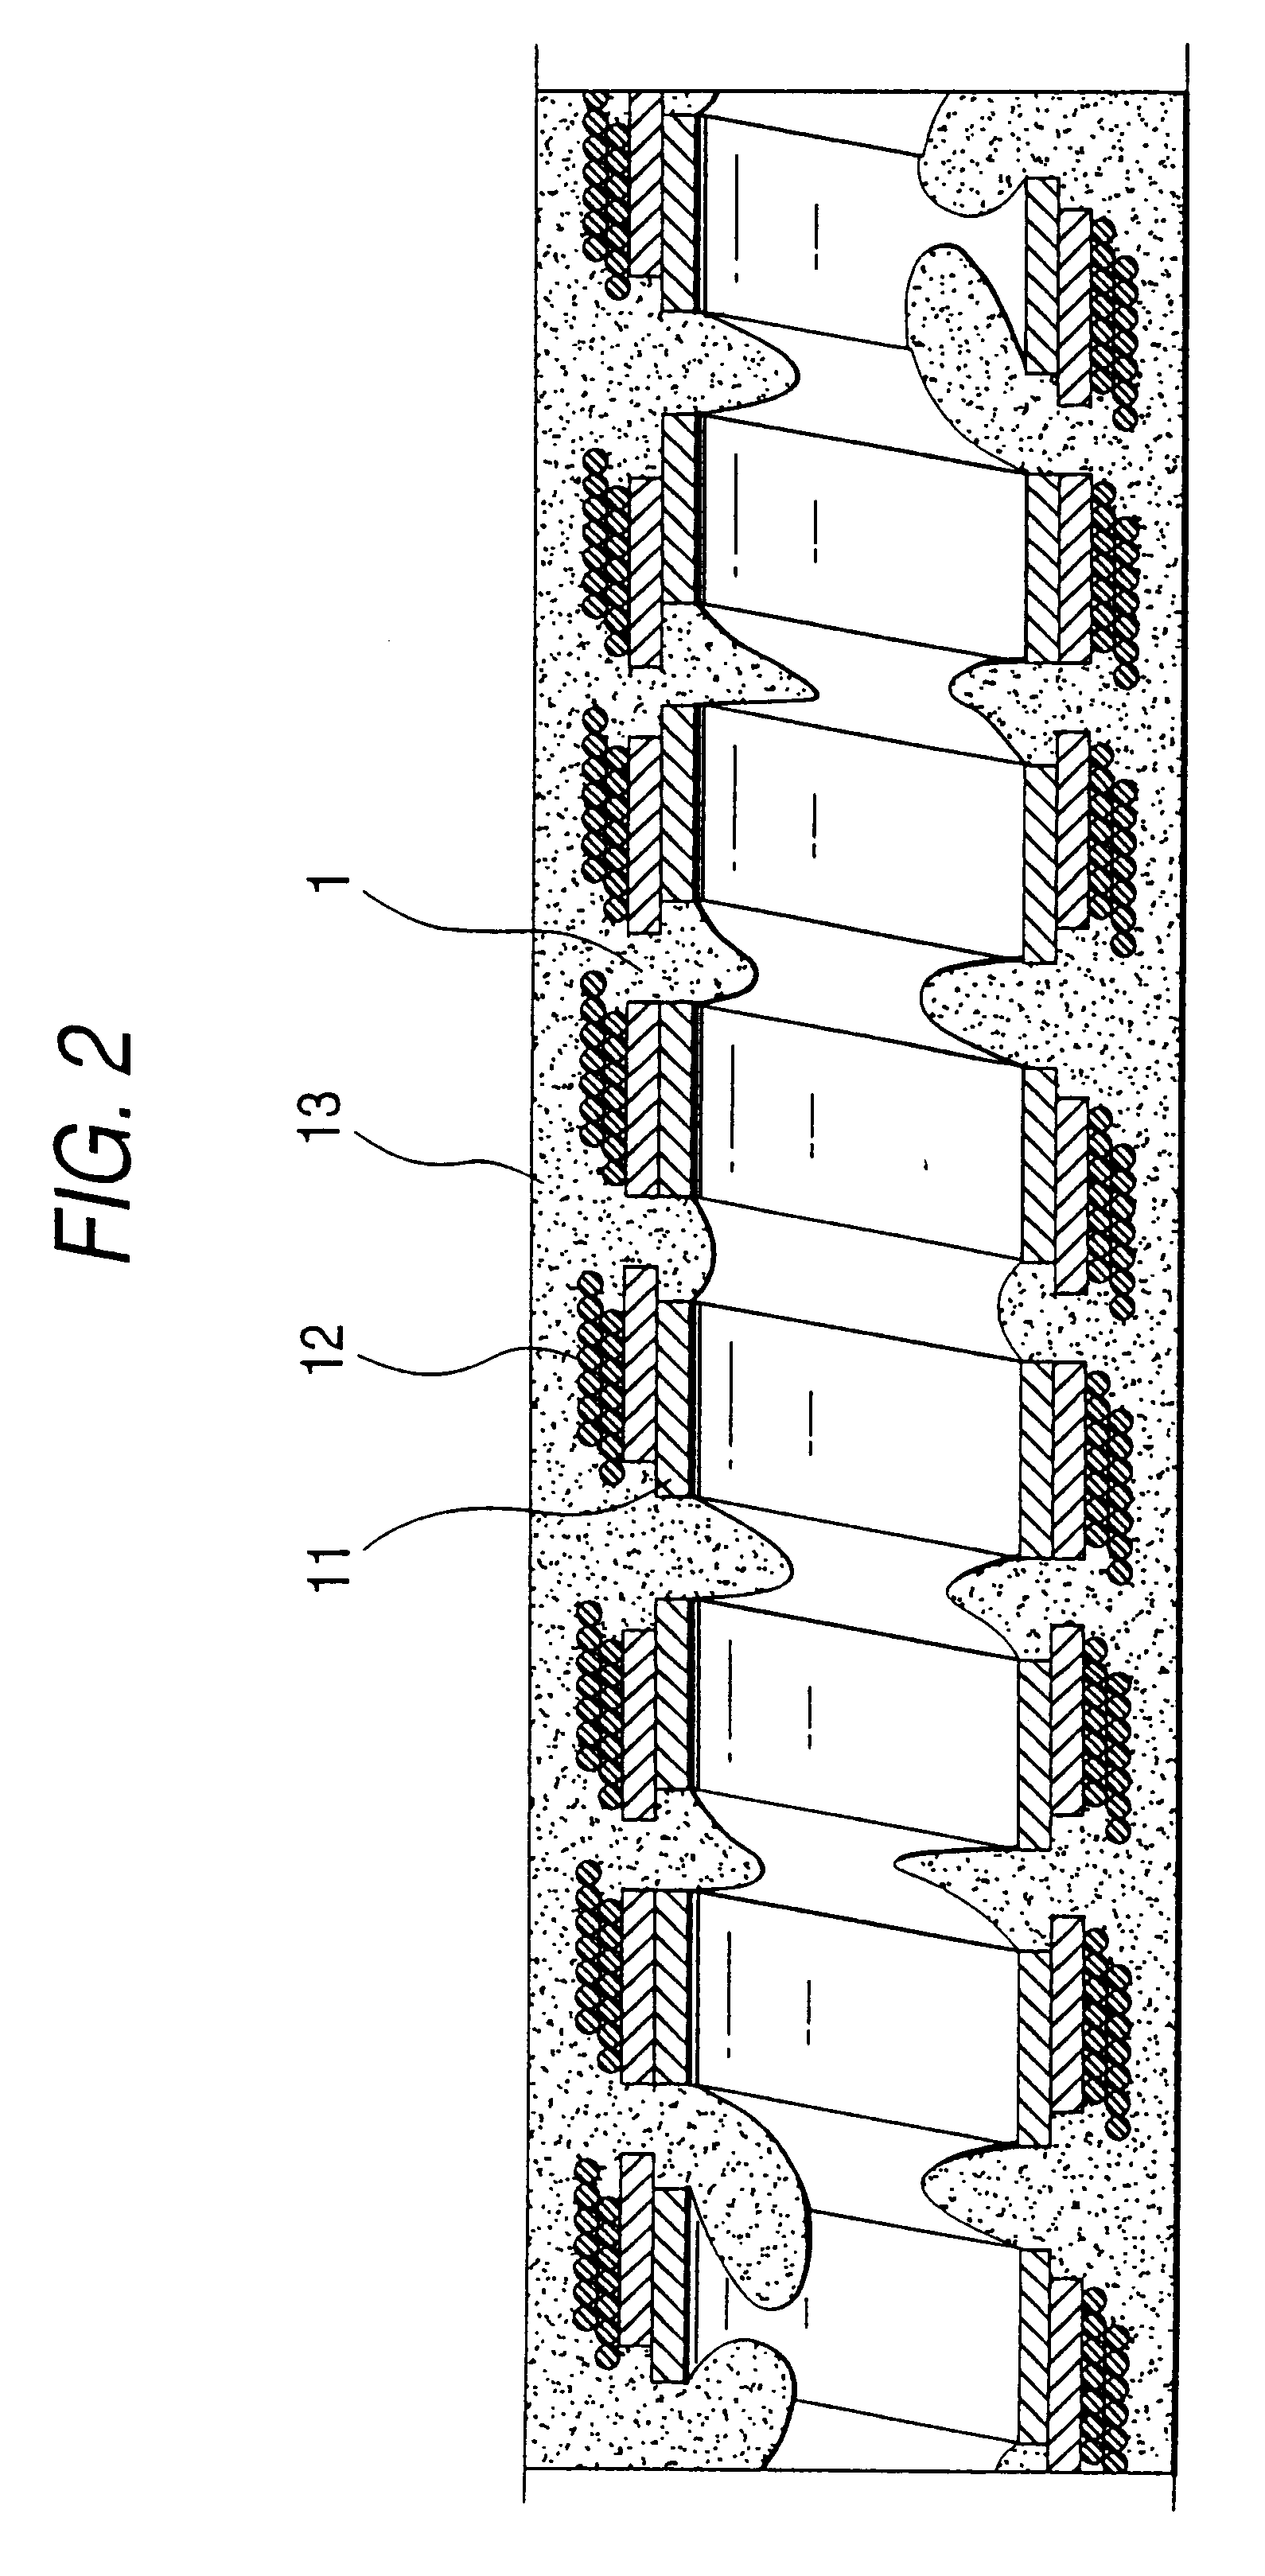 Flexible tube for endoscope and method of producing the flexible tube